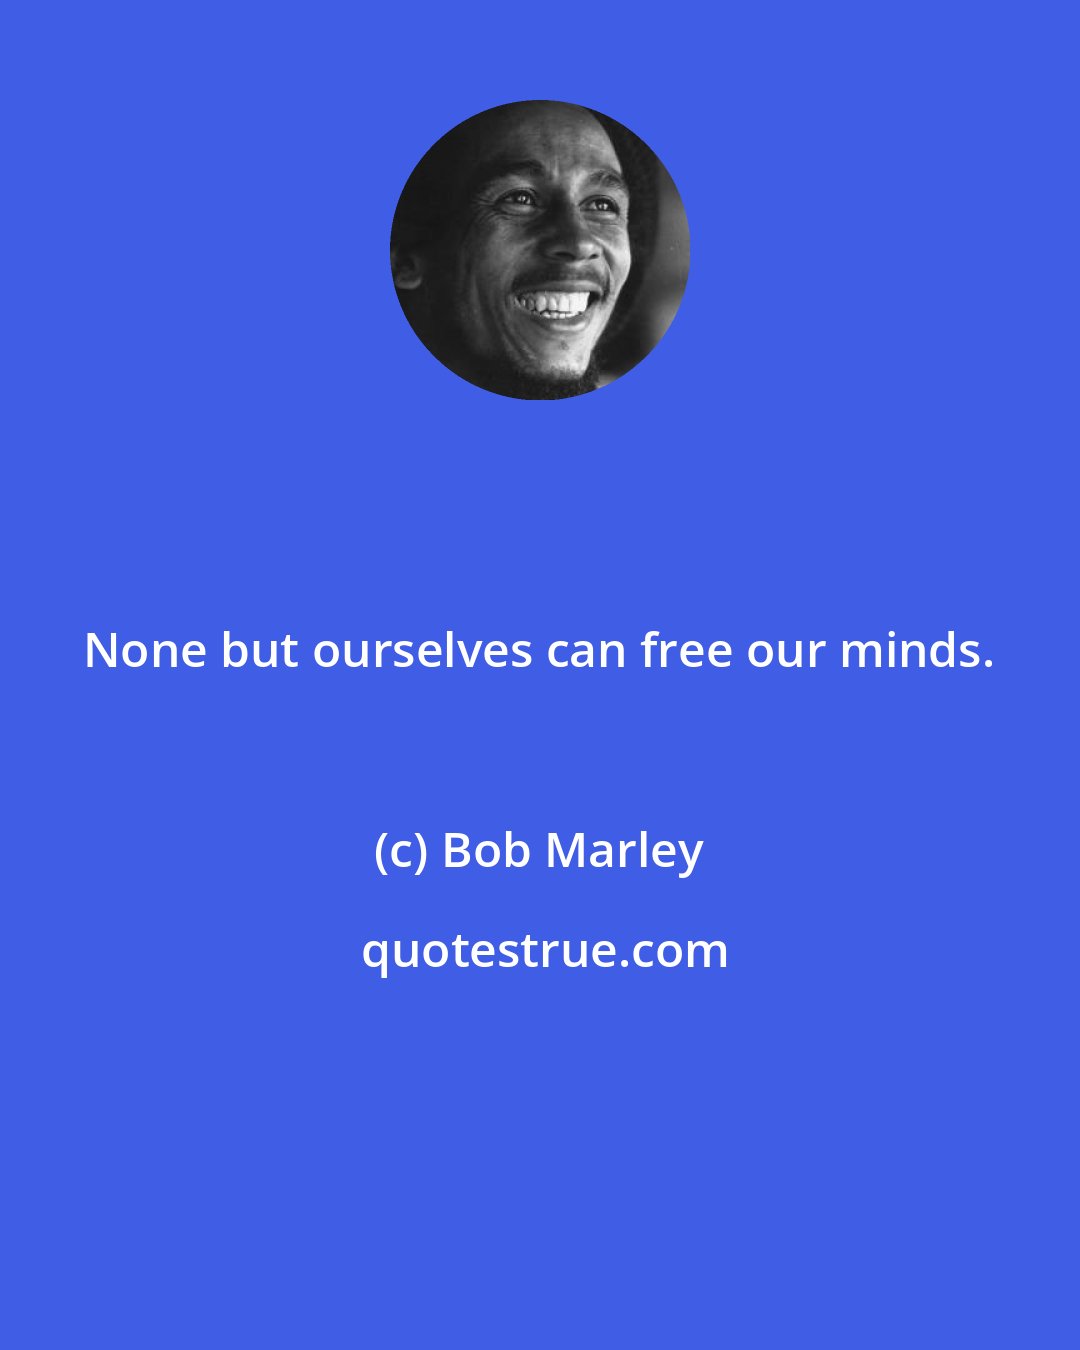 Bob Marley: None but ourselves can free our minds.